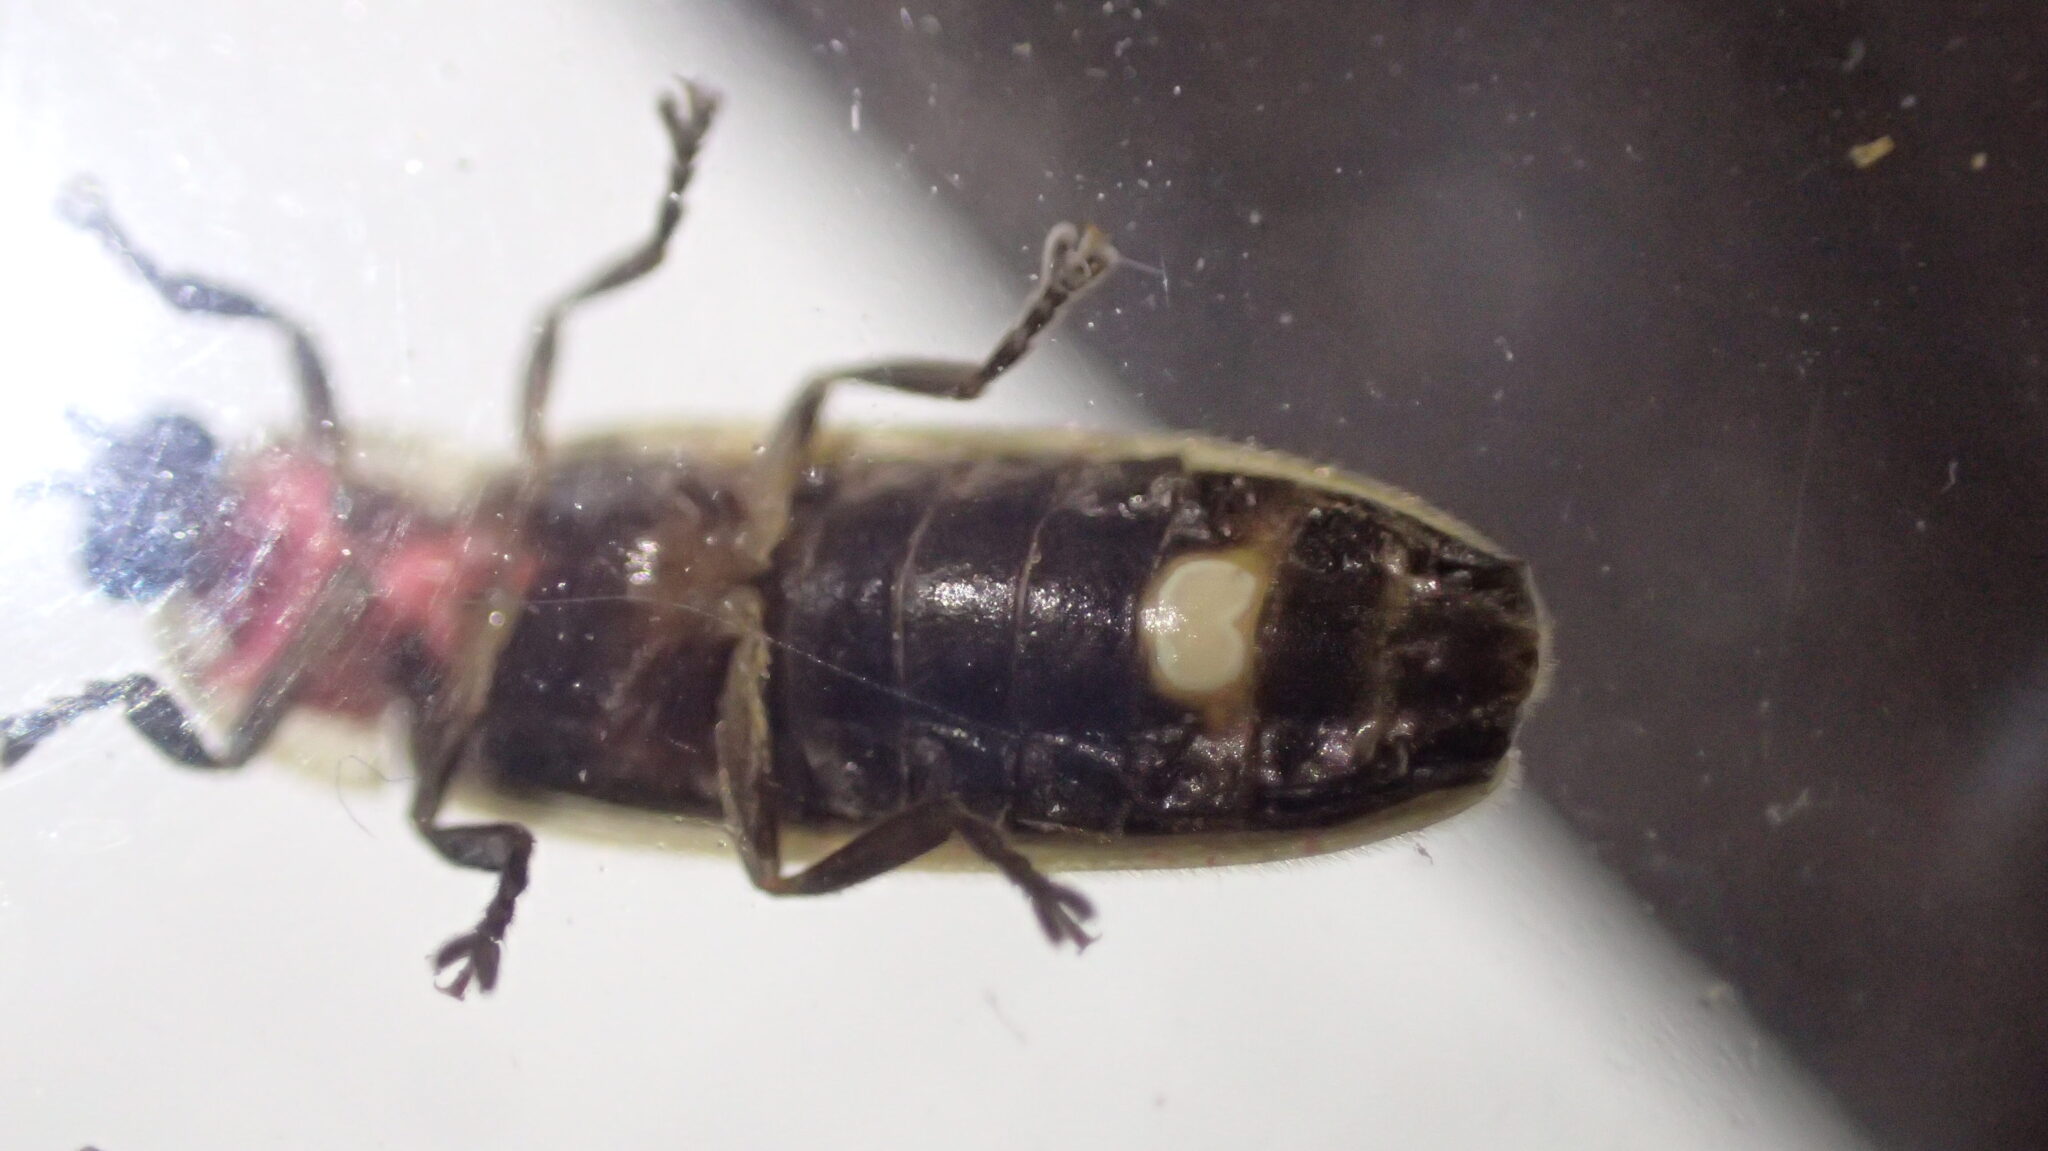 Underside of a female Photinus firefly showing small, central lantern.